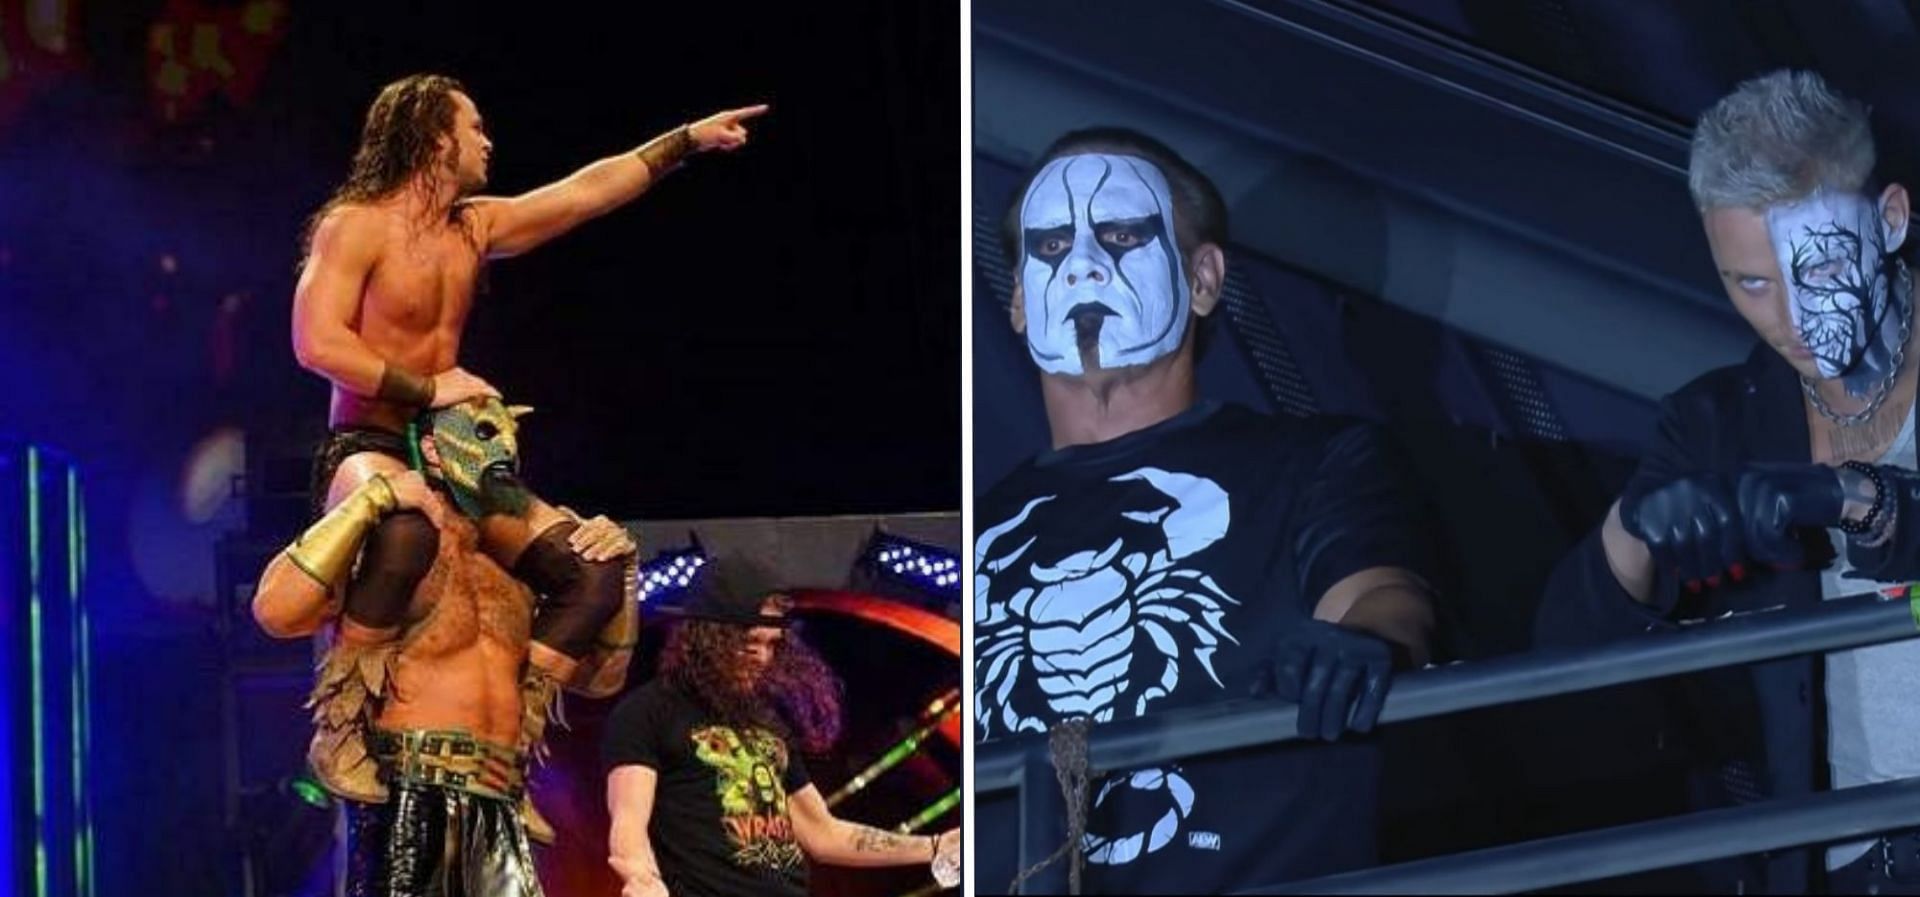 Will Darby Allin and Sting win the tag team titles this year?